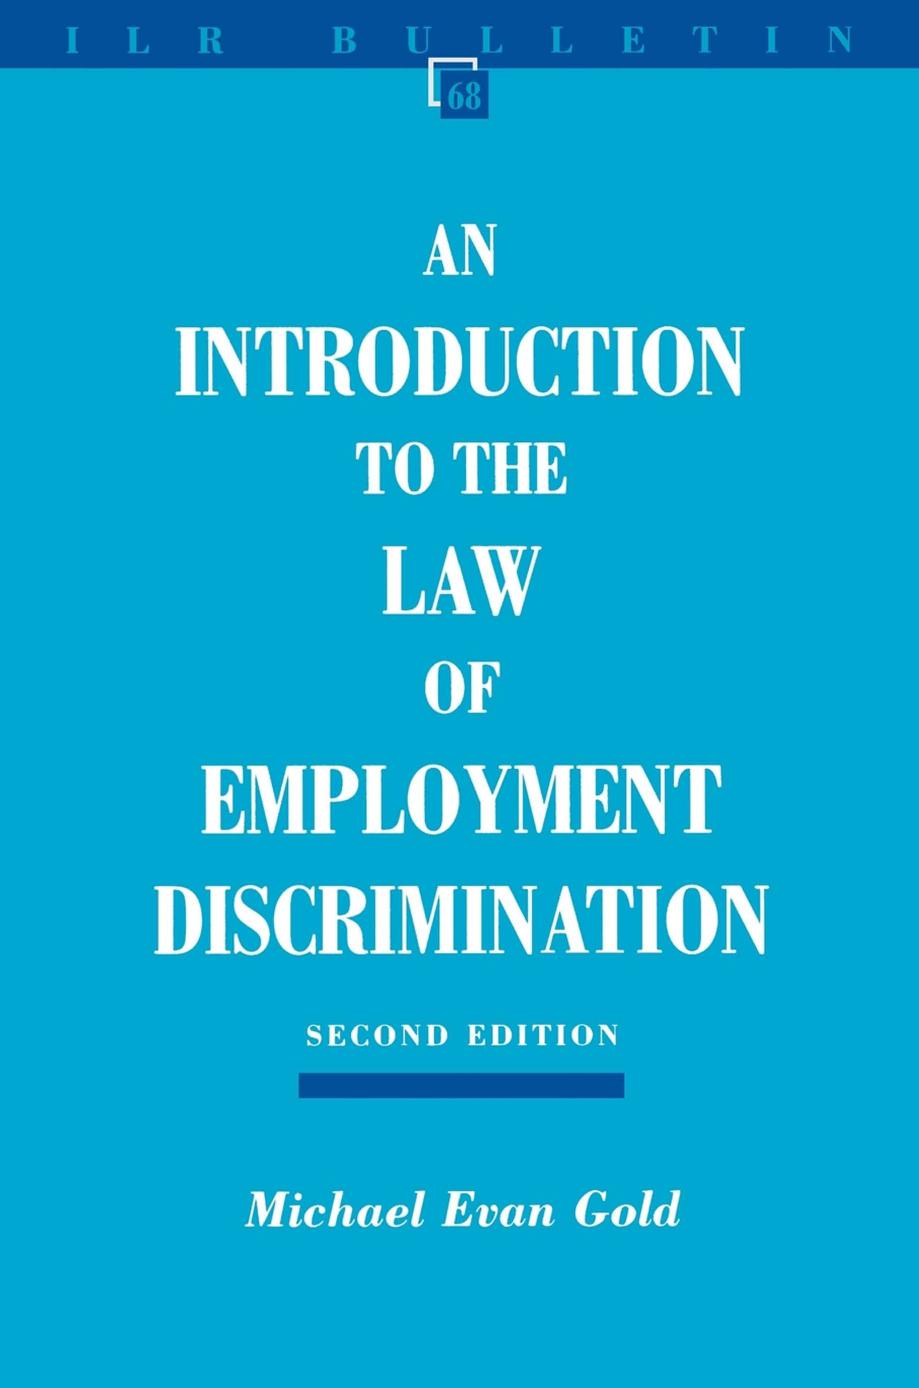 Introduction to the Law of Employment Discrimination by Michael Evan Gold